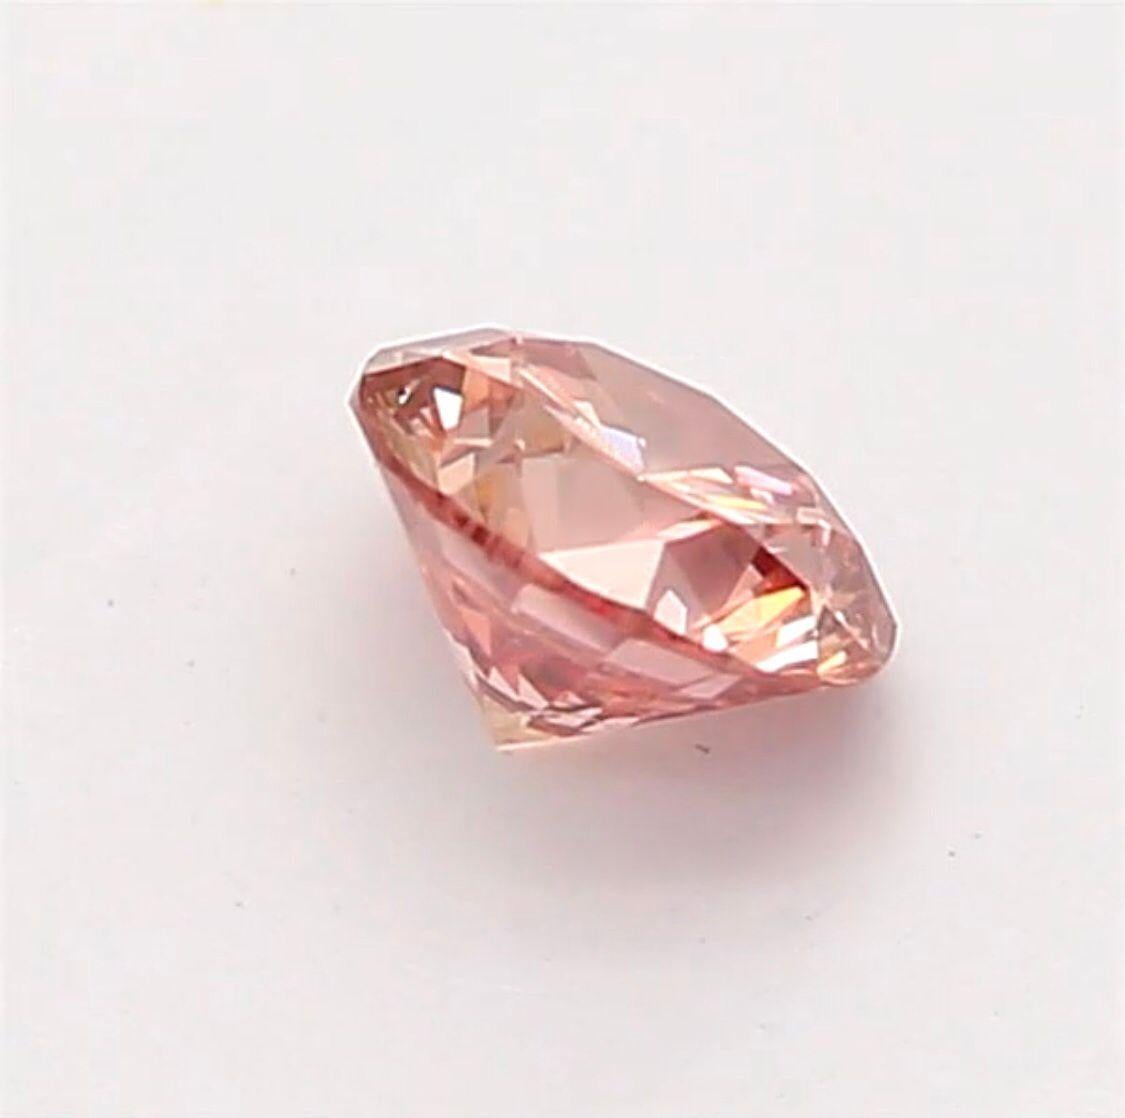 Round Cut 0.15 Carat Fancy Orangy Pink Round Shaped Diamond SI2 Clarity CGL Certified For Sale